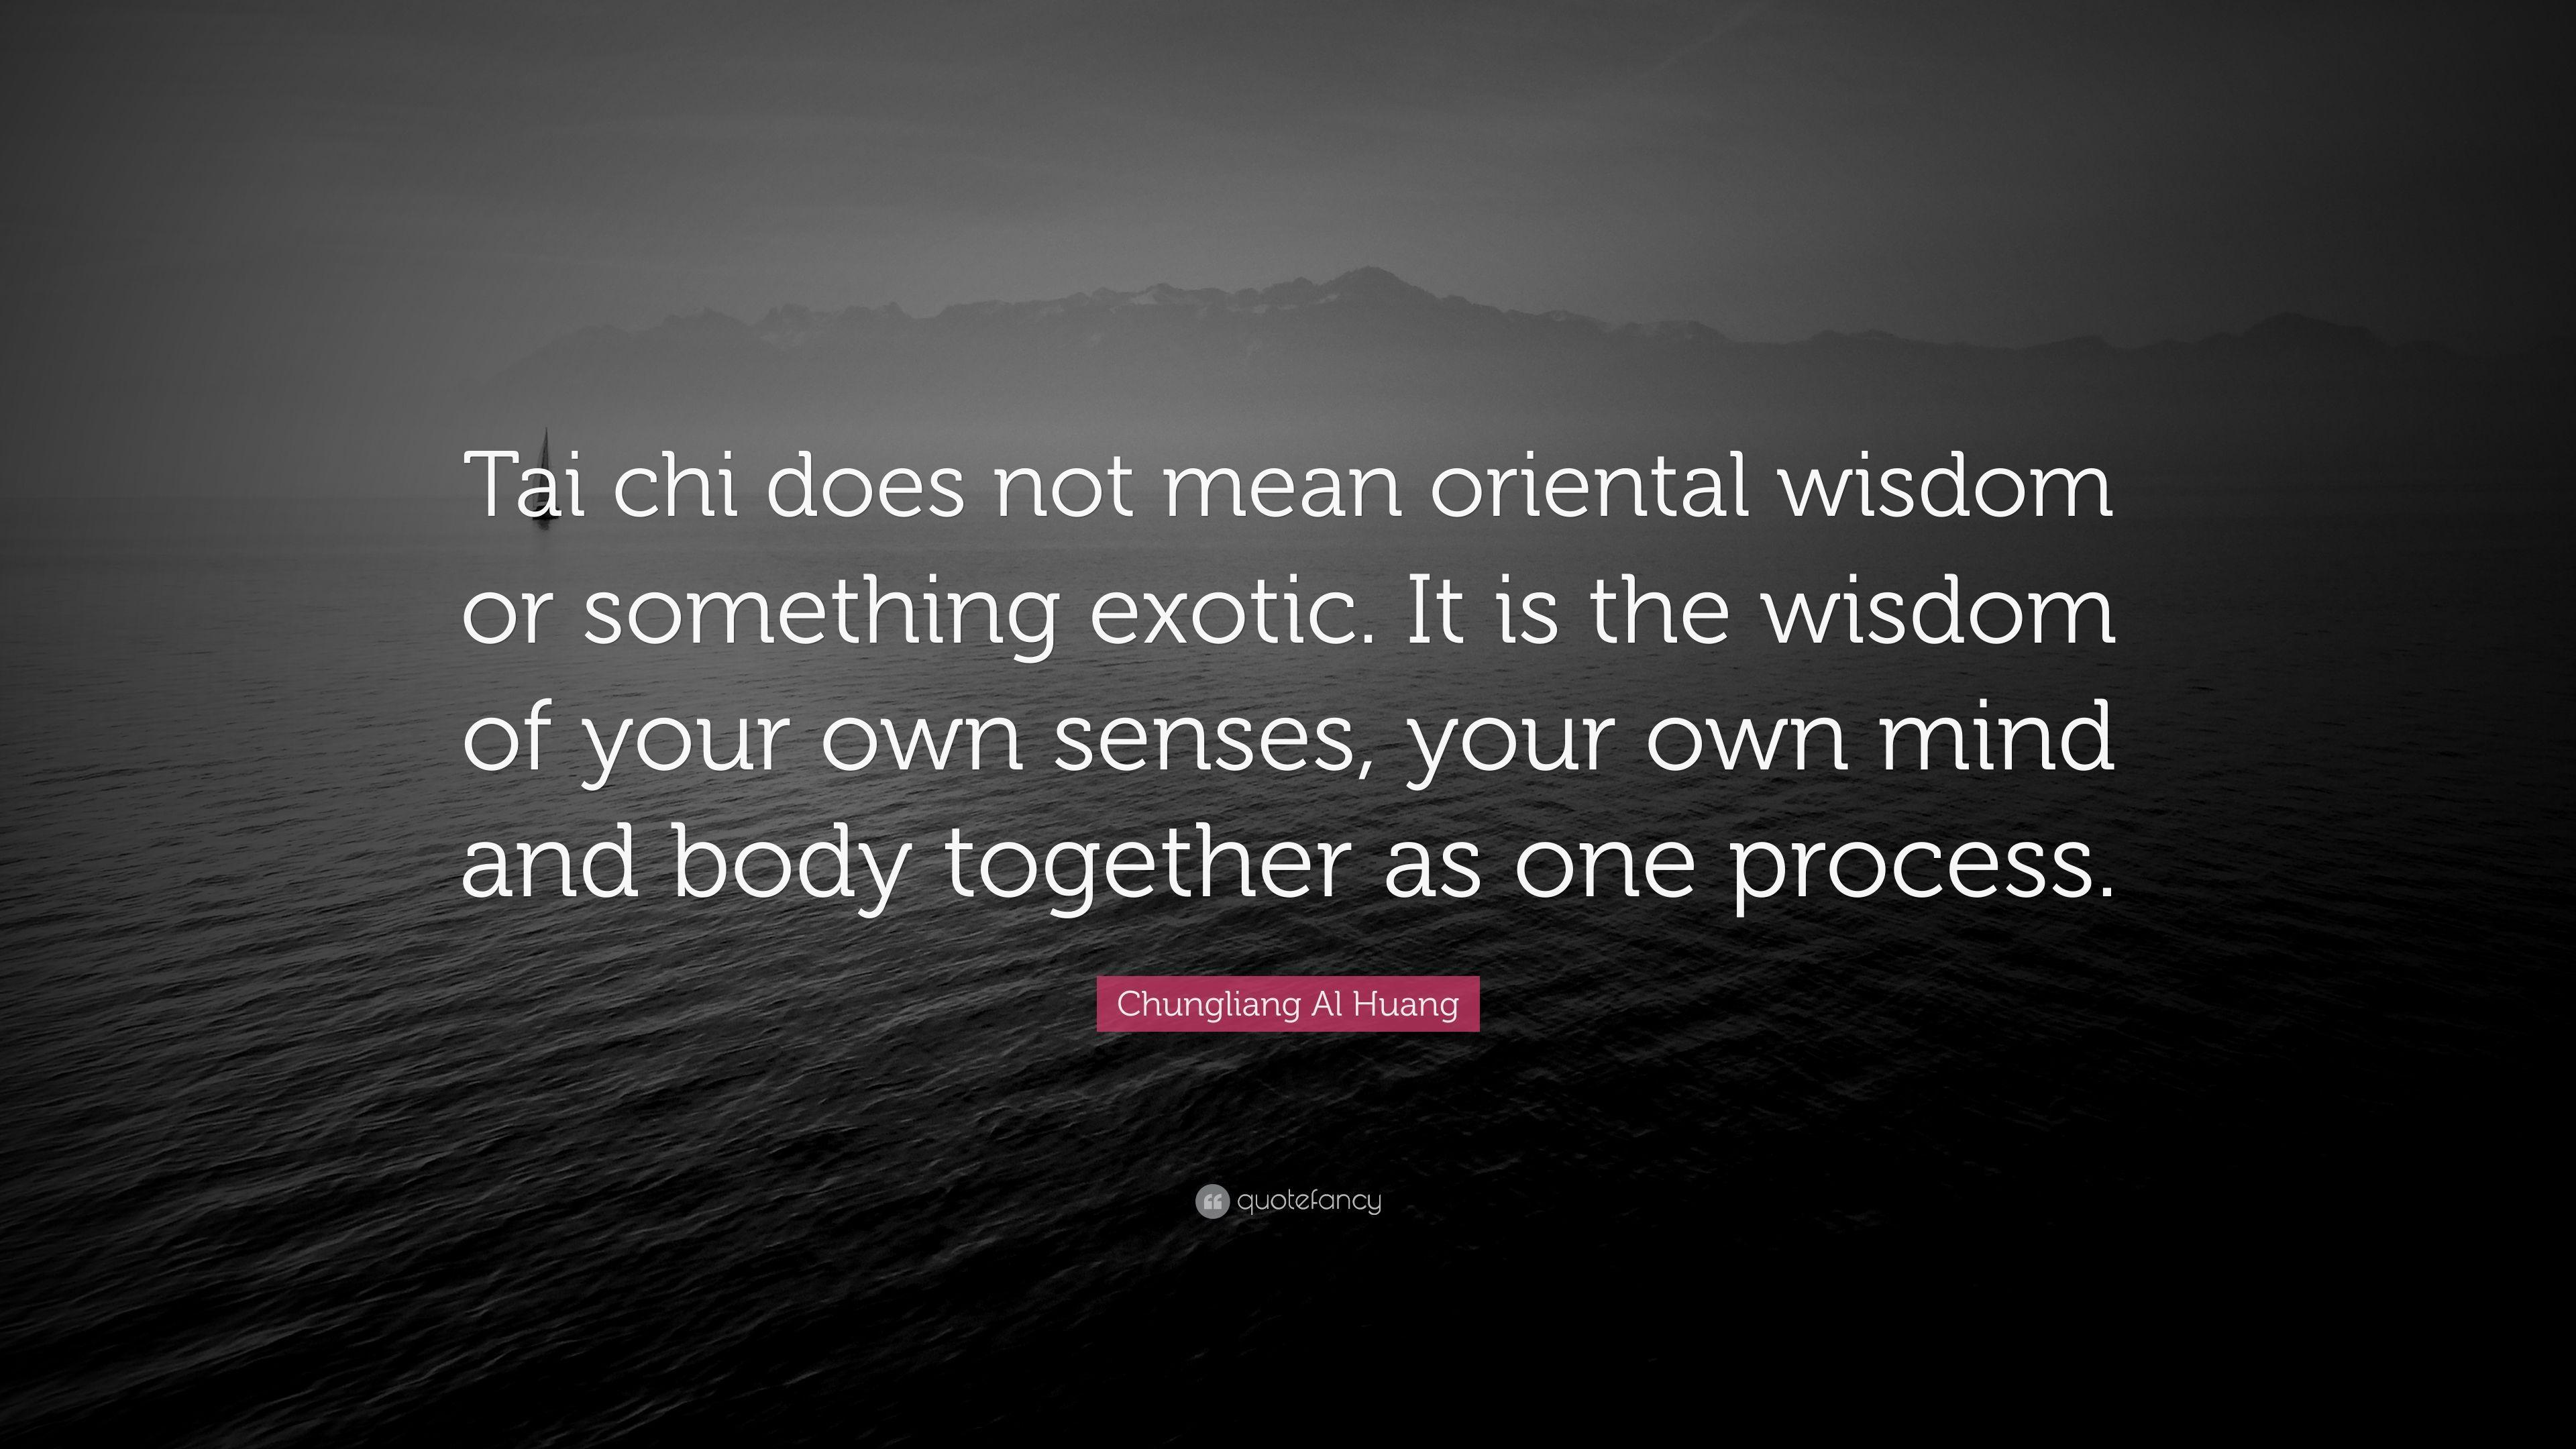 Chungliang Al Huang Quote: “Tai chi does not mean oriental wisdom or